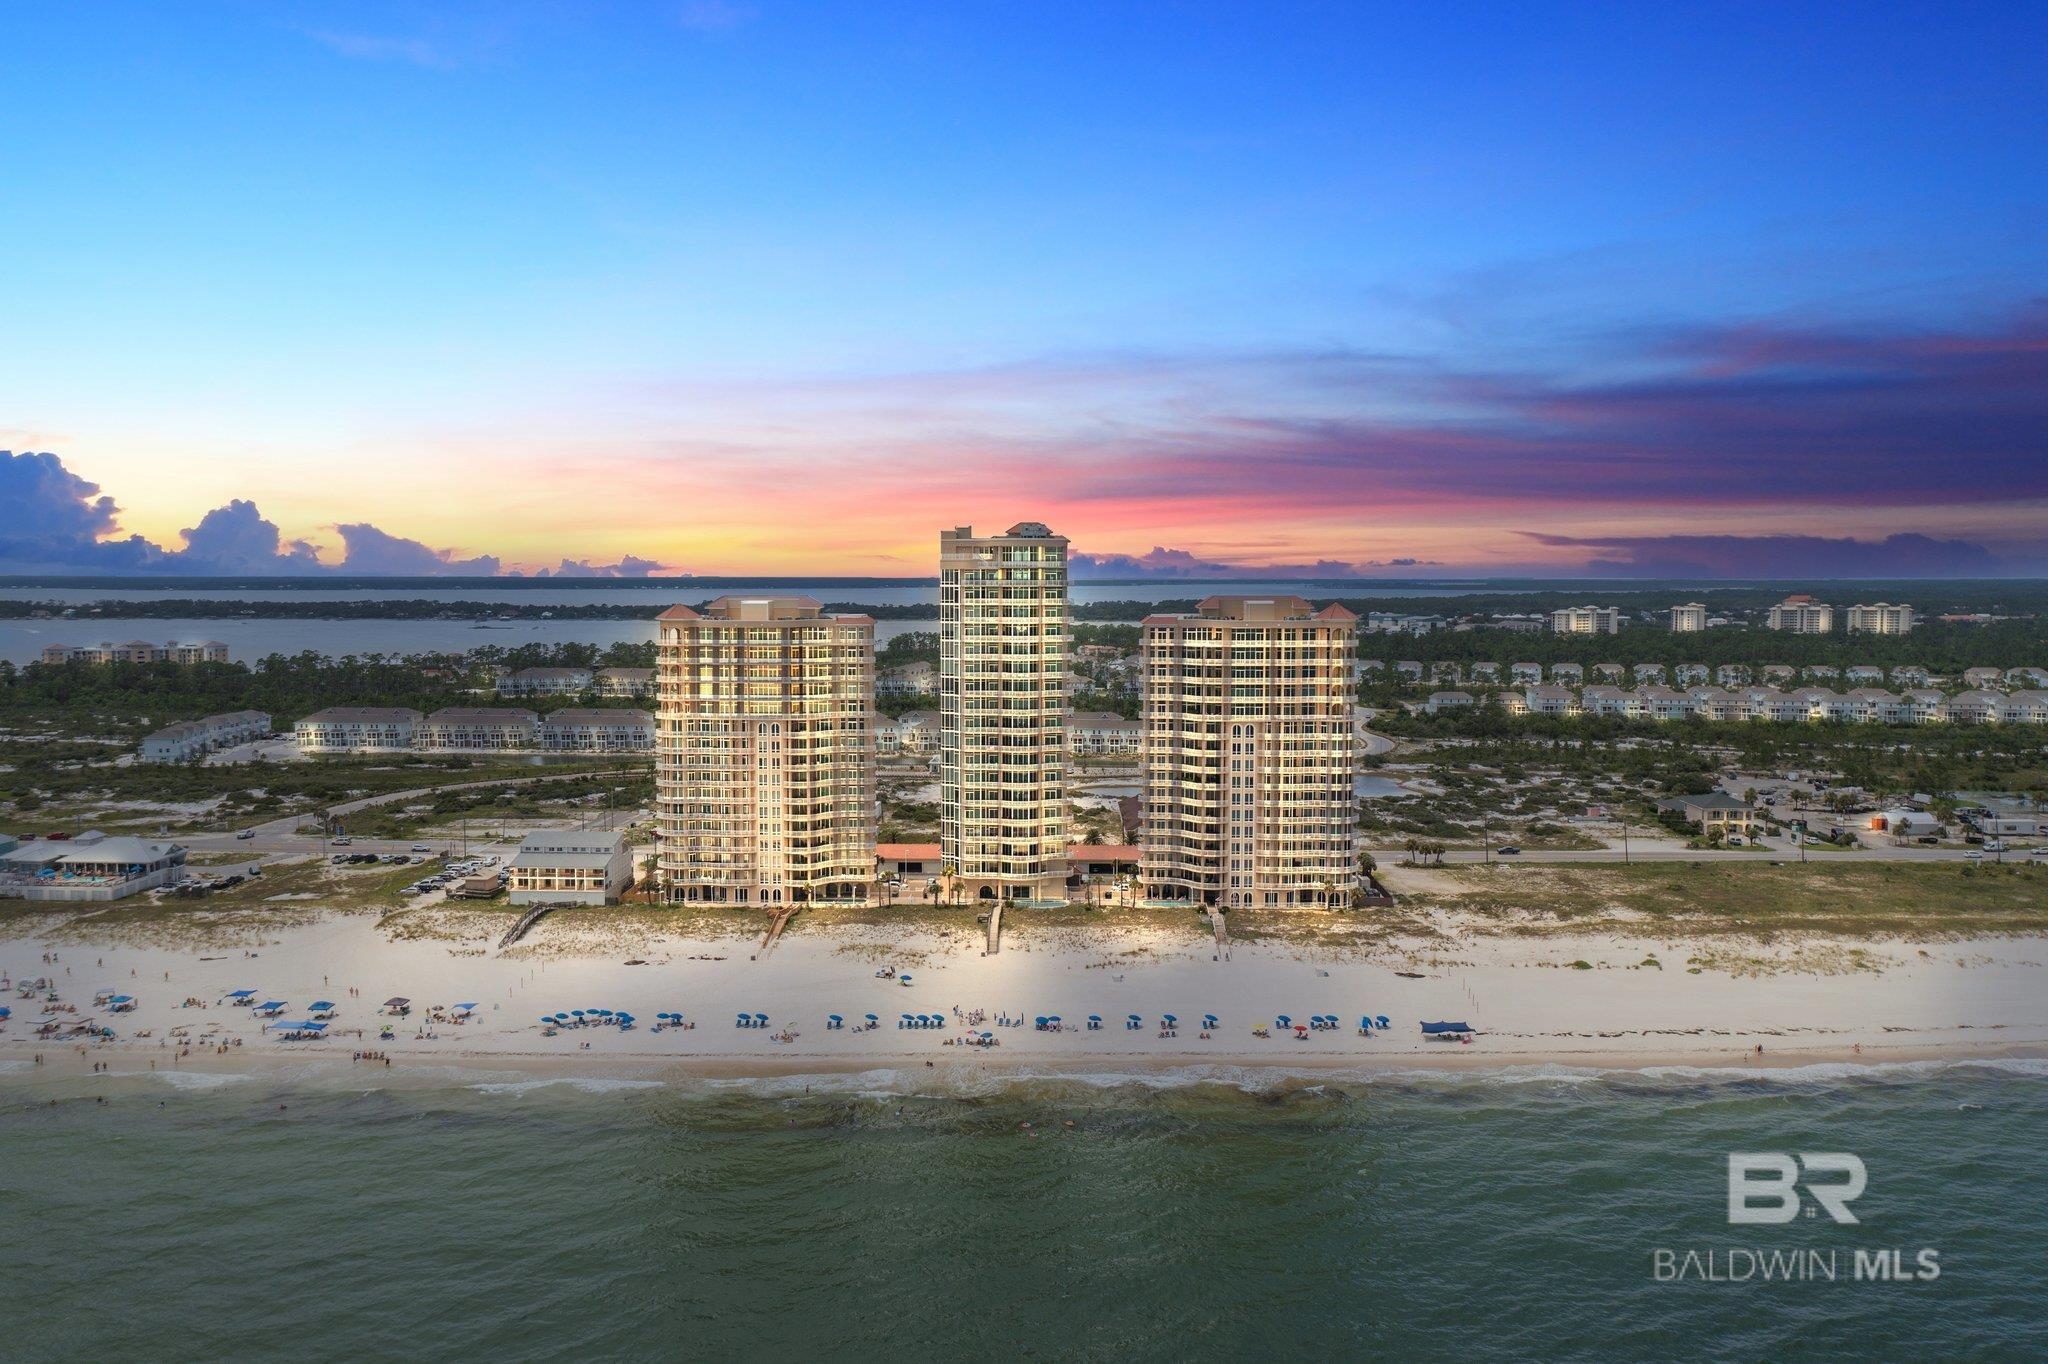 Now offering a one-of-a-kind penthouse with uncompromising quality at Perdido Key's most pristine, luxury Gulf-front condominium, La Riva. This low- density condominium complex is exceptionally private for its owners and owner's guests. This penthouse unit has unparalleled unobstructed panoramic views of miles of the Gulf of Mexico and the beaches of Perdido Key. The immaculately furnished 5-bedroom + BUNK ROOM, 4.5-bath haven presents an abundance of natural light, chef’s kitchen and spacious outdoor living areas – The finest luxury interior and gorgeous open floor plan to encompass only the best views from the 15th floor of all Perdido Key, offering floor to ceiling impact-resistant glass, high-stretching 11’ ceilings, and 2982sqft of balcony space. In addition to it’s elegant features and furnishings, this residence offers stylish flooring, polished granite countertops, richly custom wood cabinetry, chef’s kitchen, stainless steel appliances, gourmet island, wet bar, wine refrigerator, and great spaces for all of your entertaining needs. La Riva has only 66 units total in the 3-tower complex, with ONLY 25 residences at La Riva West, providing a rare opportunity to enjoy uncrowded beaches. A deeded garage space and storage unit conveys with the property. This private, gated complex is rent-restricted, with no short-term rentals allowed. Each tower at La Riva features its own grand lobby with multiple seating areas, lavish outdoor pool, indoor pool, fitness room, grilling area, game room and expansive beachfront deck. With lush landscaping and the beaches of Perdido Key surrounding your new waterfront abode, you can be sure to expect an exquisite living experience at La Riva #15W. Call today to schedule your private tour!